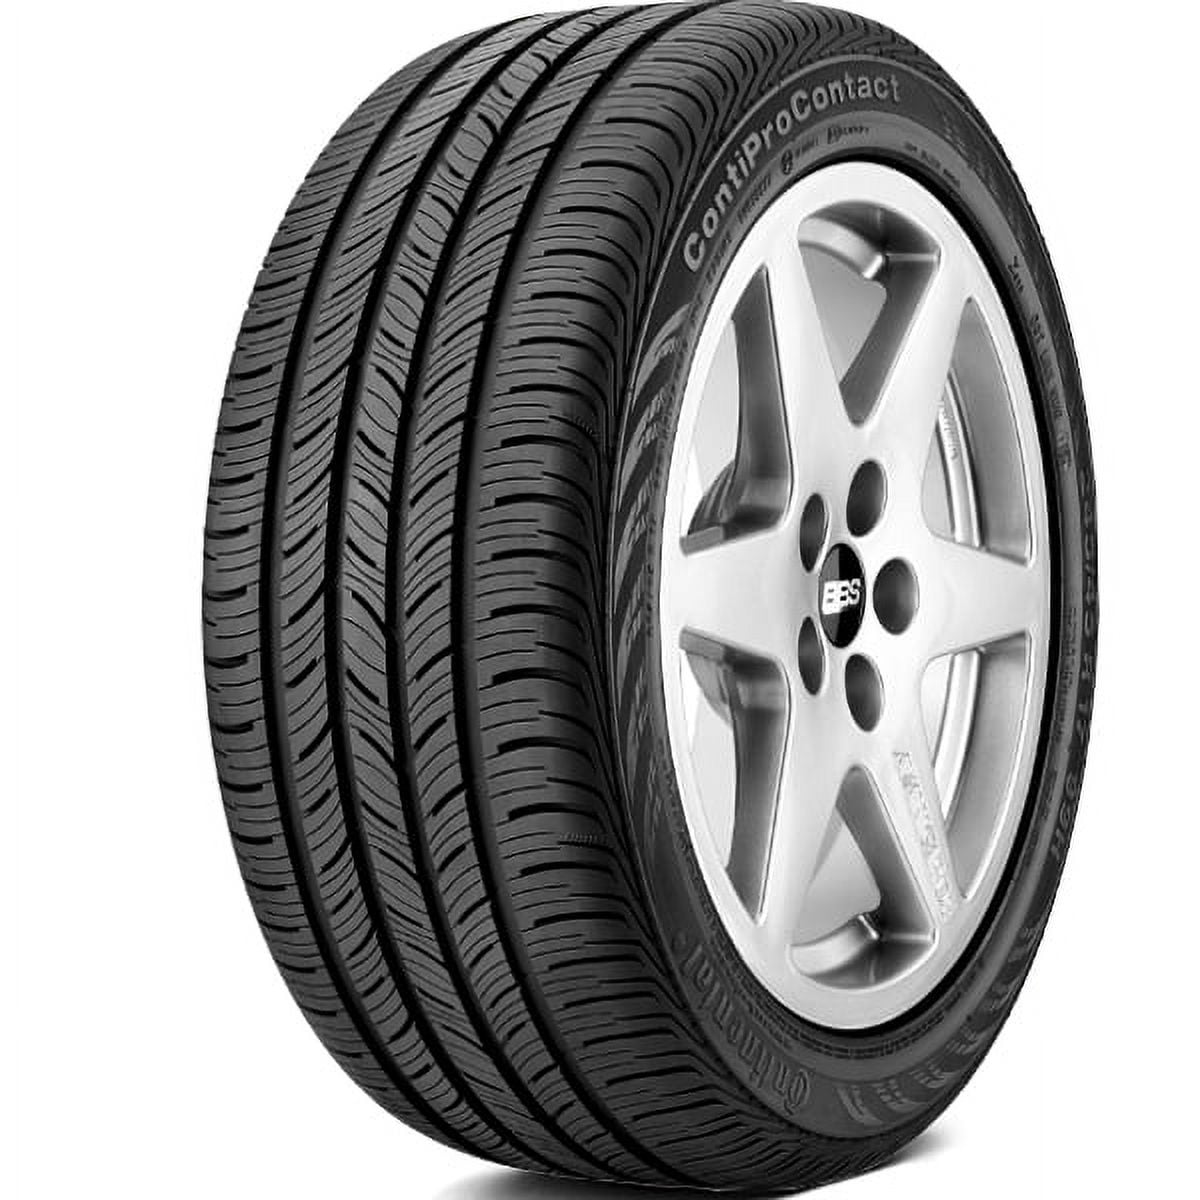 All BSW Continental 205/50R17 89V ContiProContact Tire Season